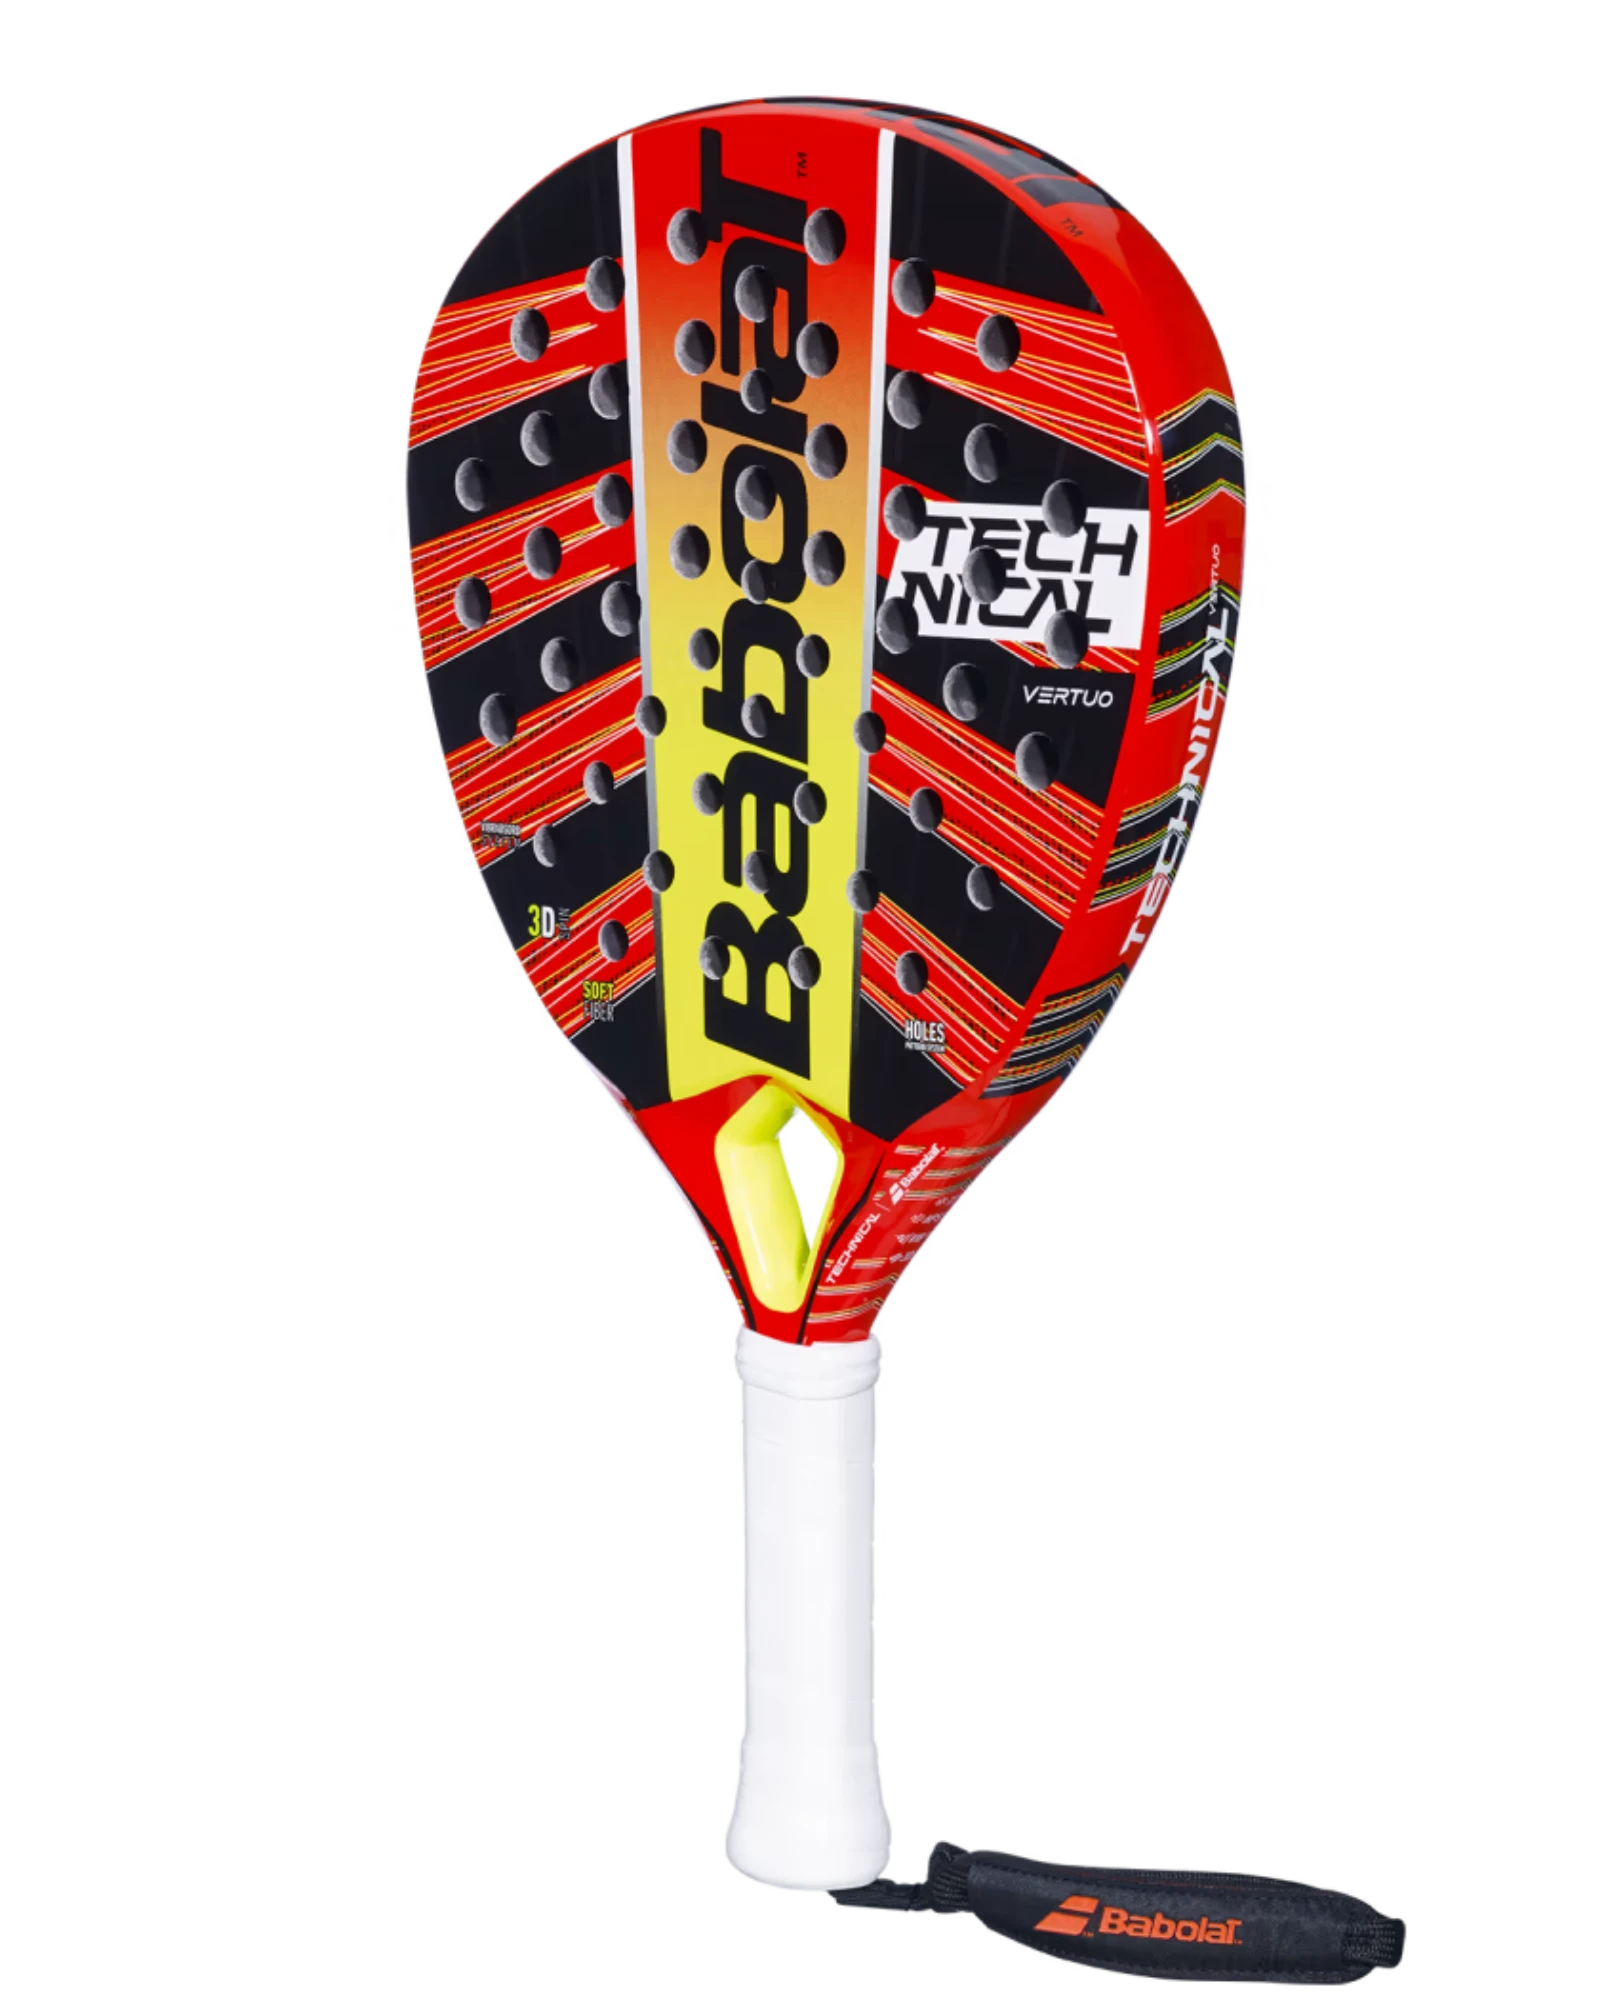 The Babolat Technical Vertuo Padel Racket